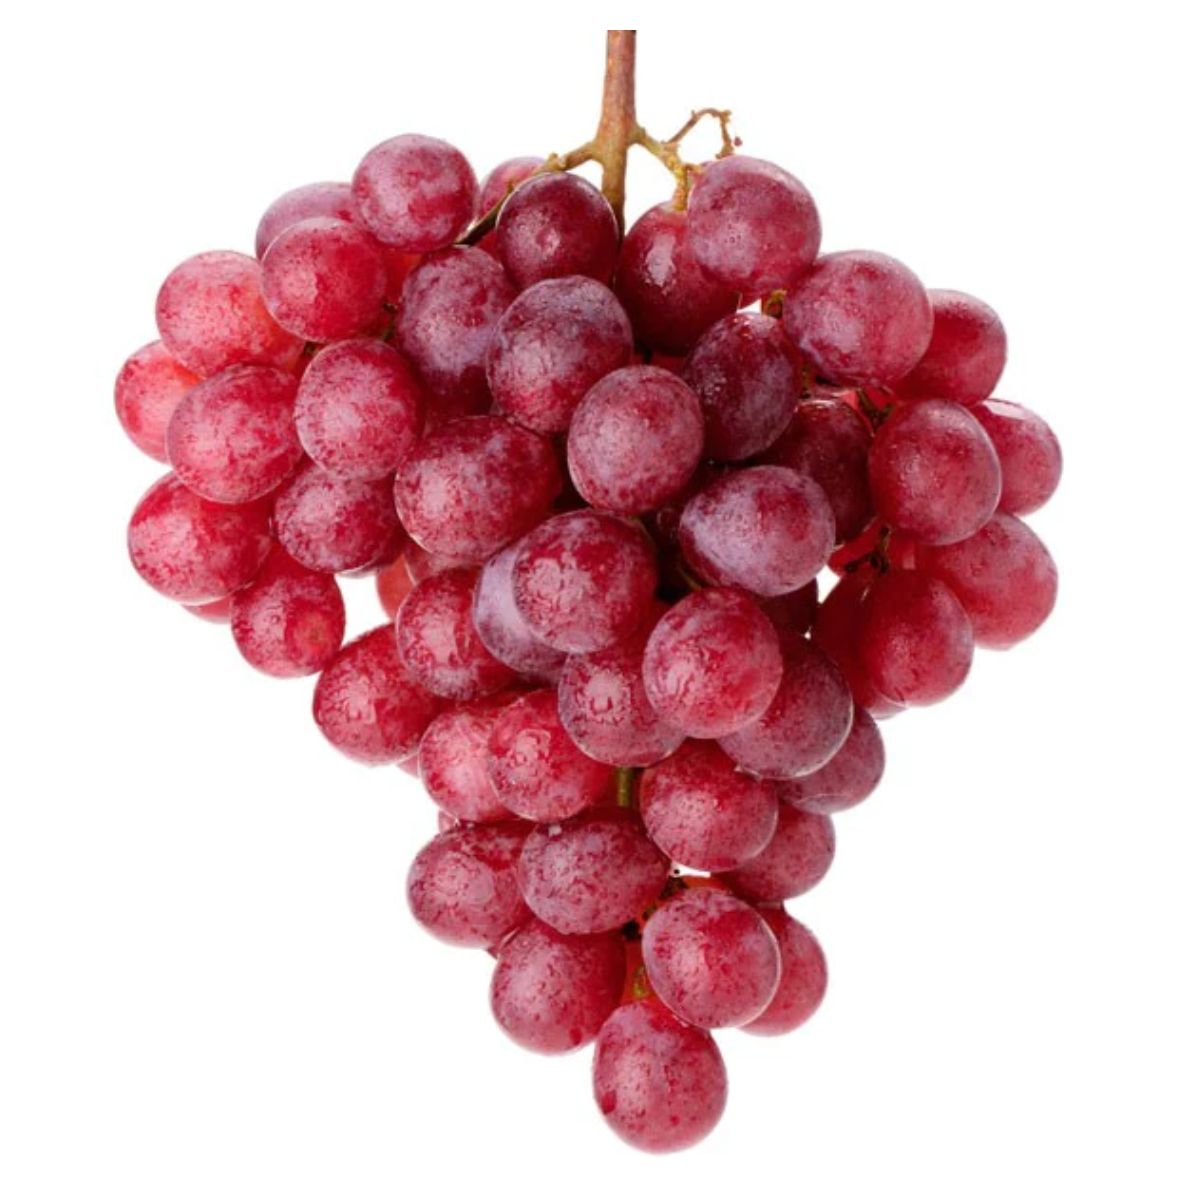 A bunch of Juicy - Red Grapes - 500g on a white background.